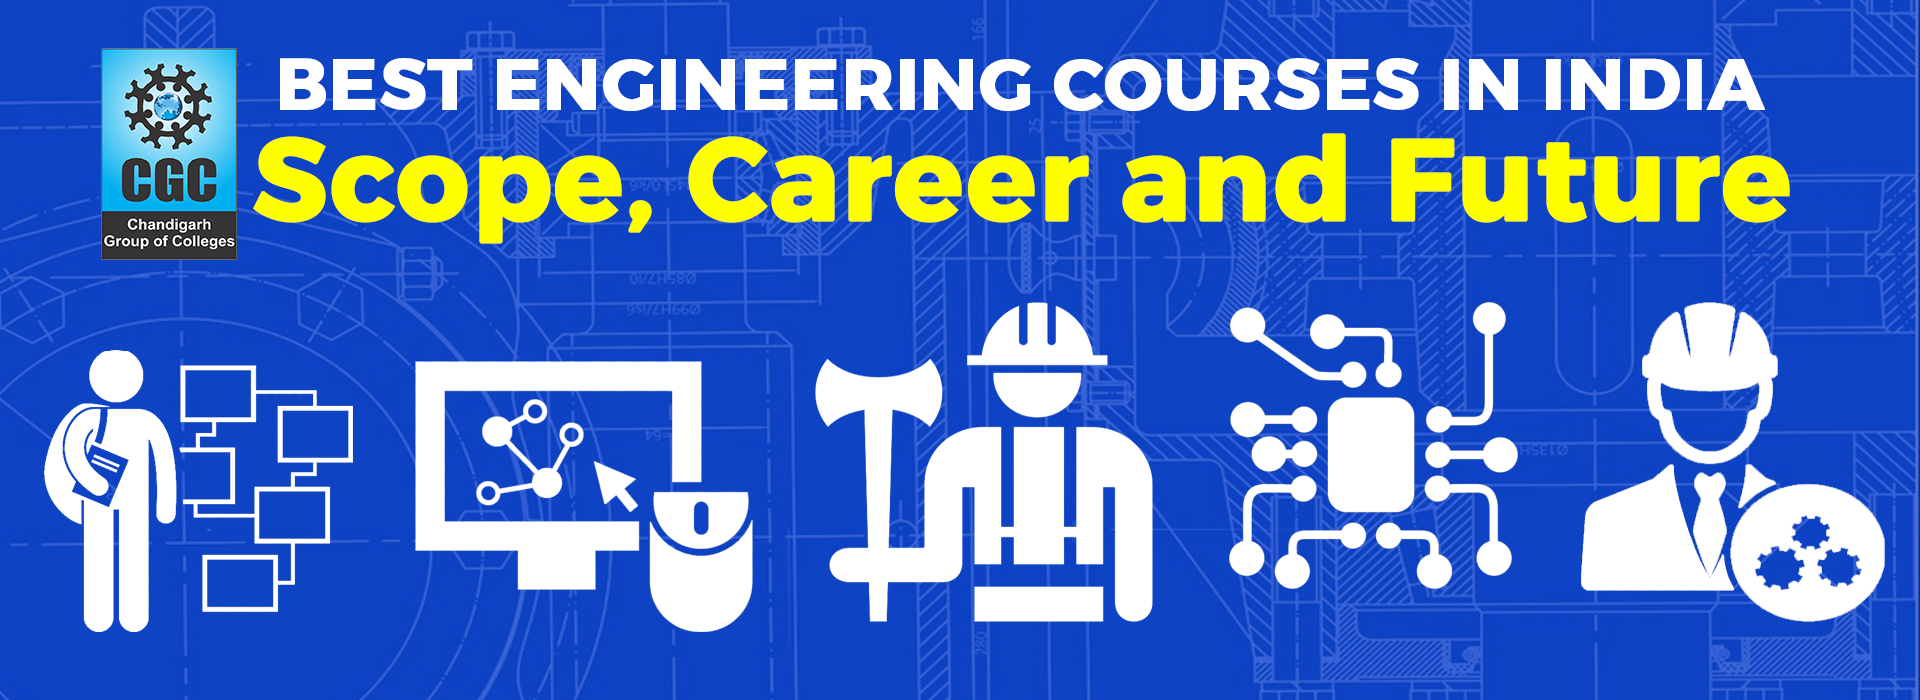 Best Engineering Courses in India: Scope, Career, and Future 